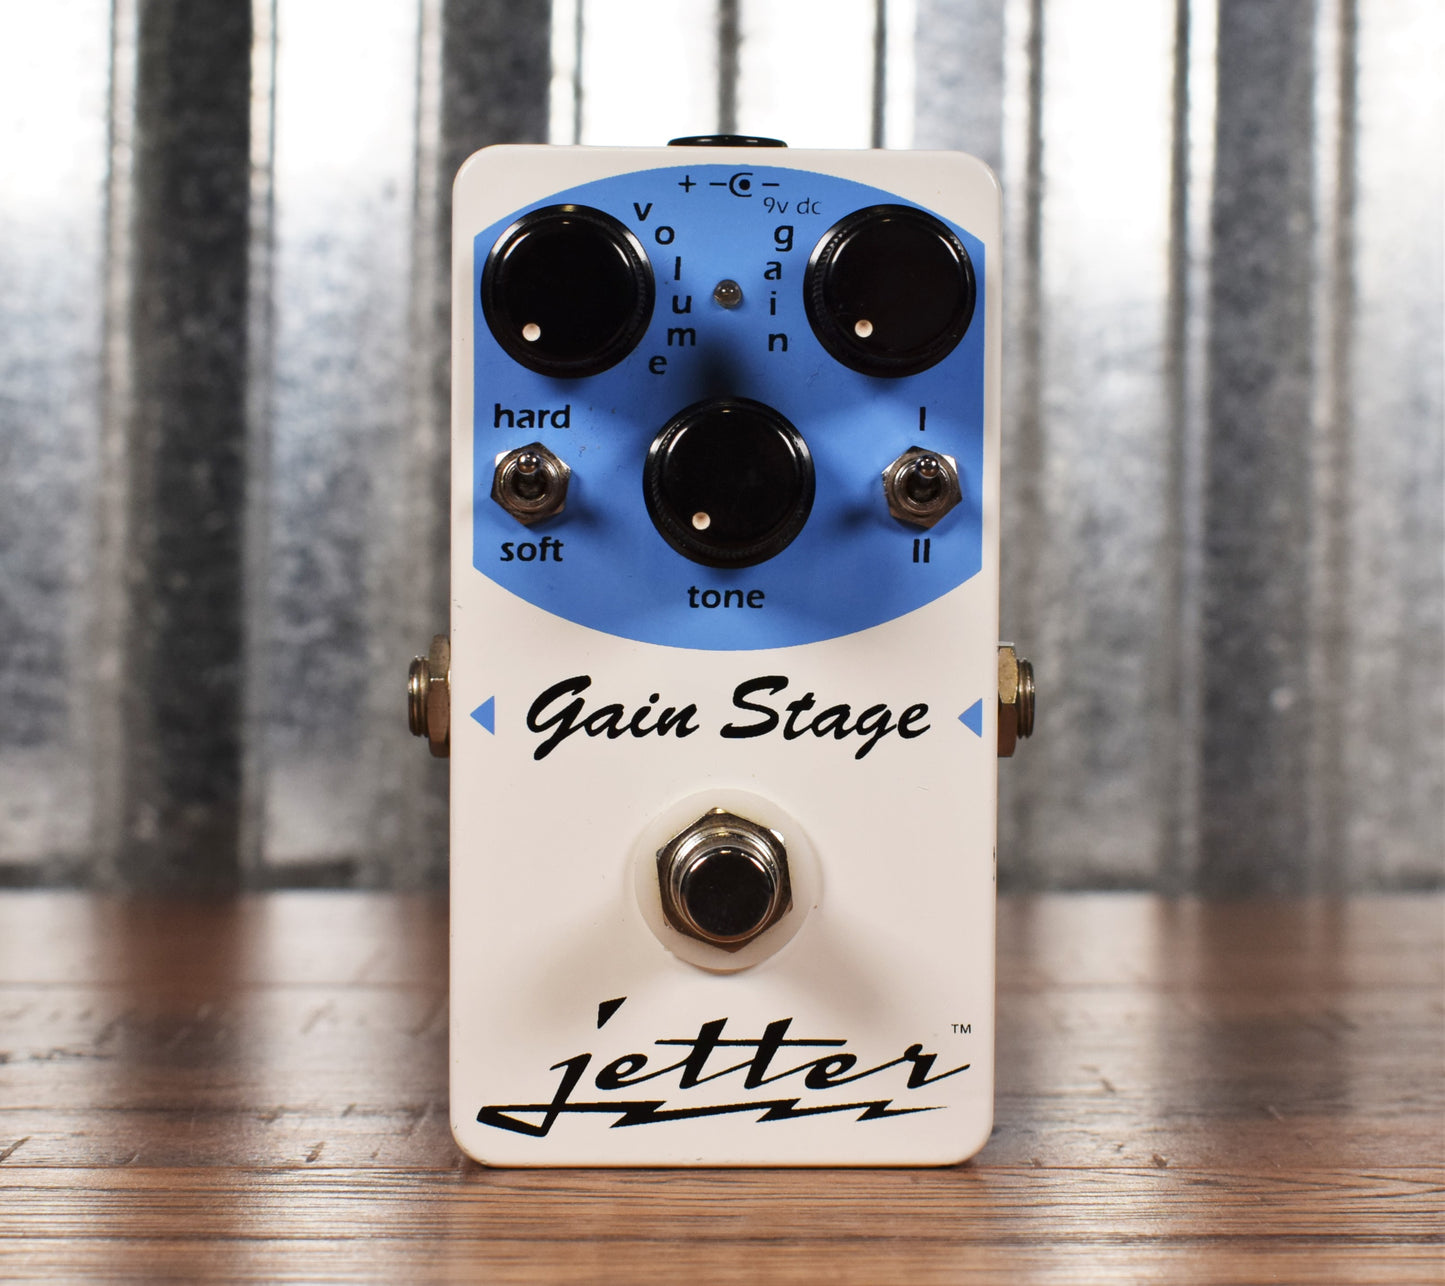 Jetter Gear Gain Stage Blue Overdrive Guitar Effect Pedal Used